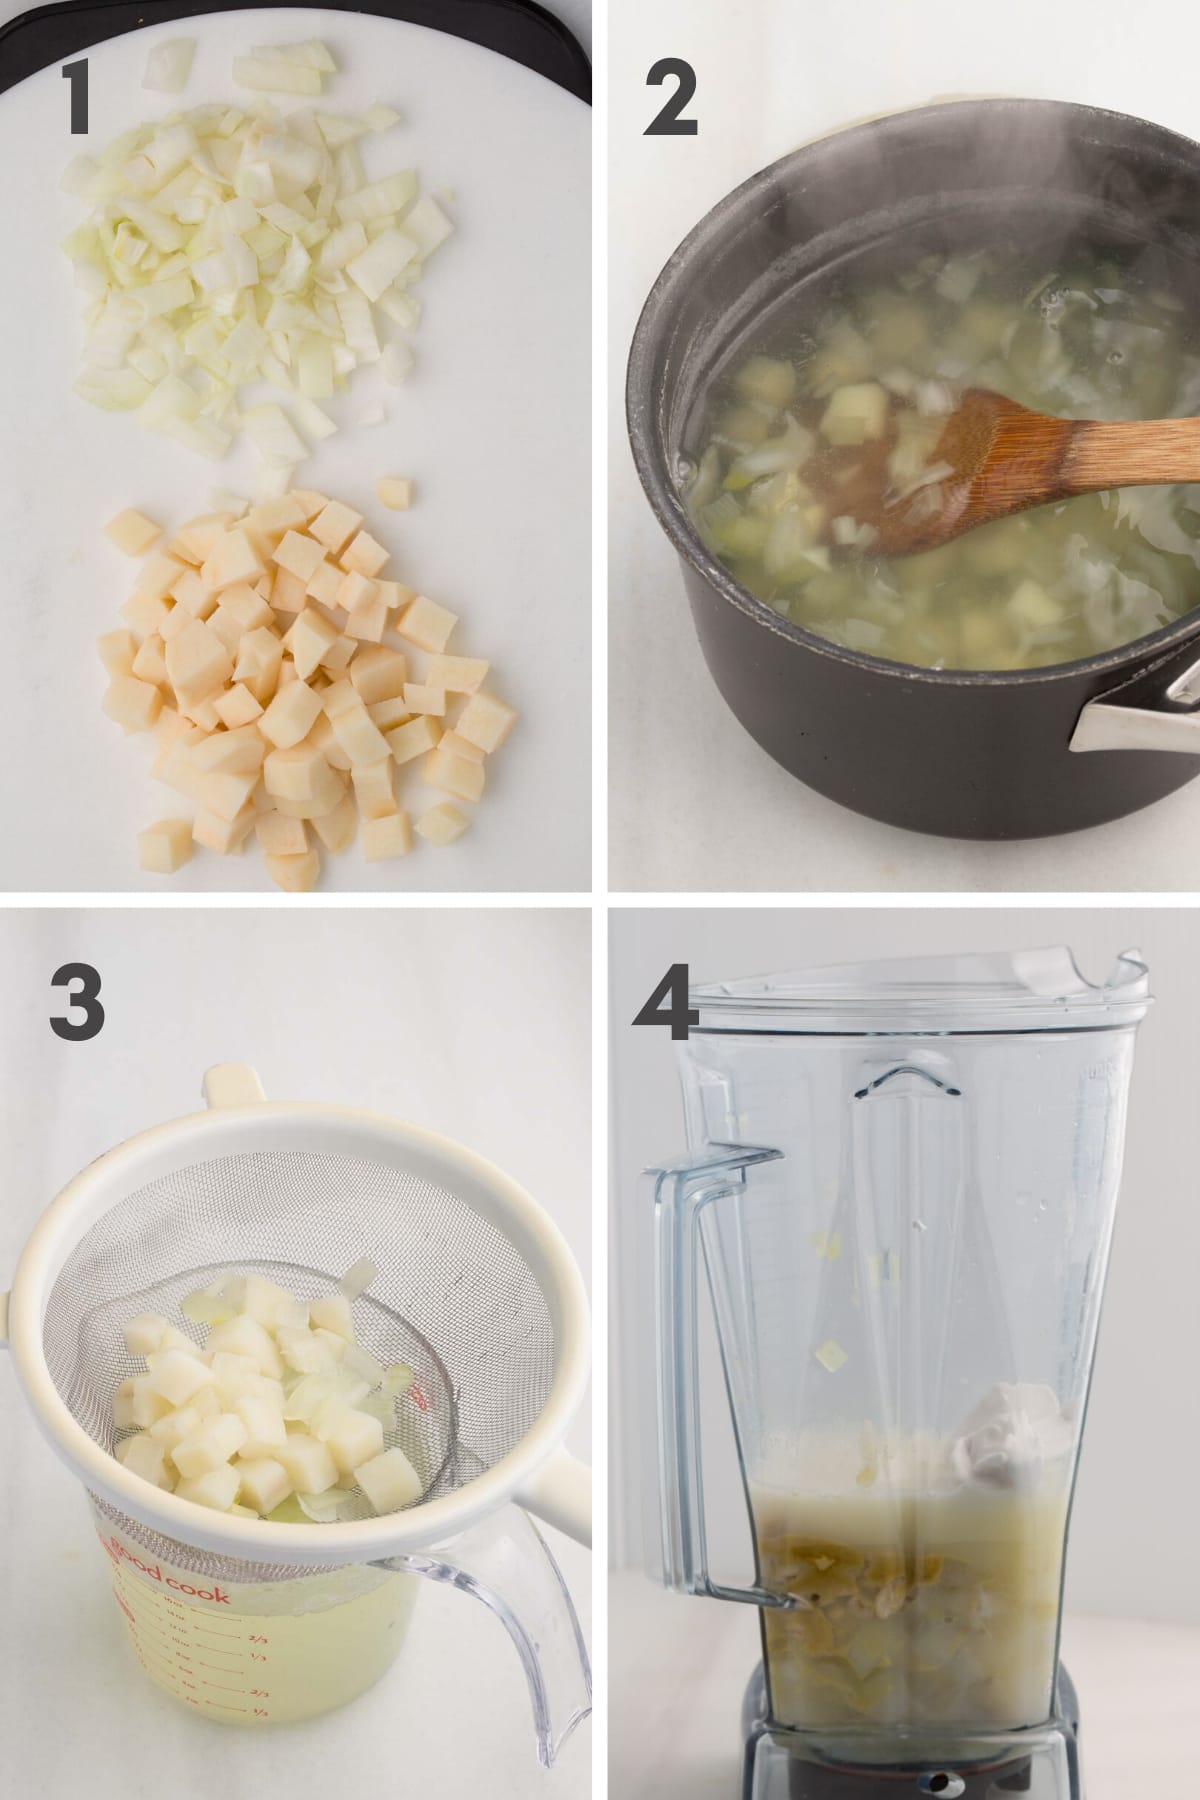 Steps 1-4 of making vegan alfredo: chopped potatoes and onions on cutting board, potatoes and onion boiling in saucepan, cooked potatoes and onion in strainer over measuring device, and alfredo ingredients in upright blender